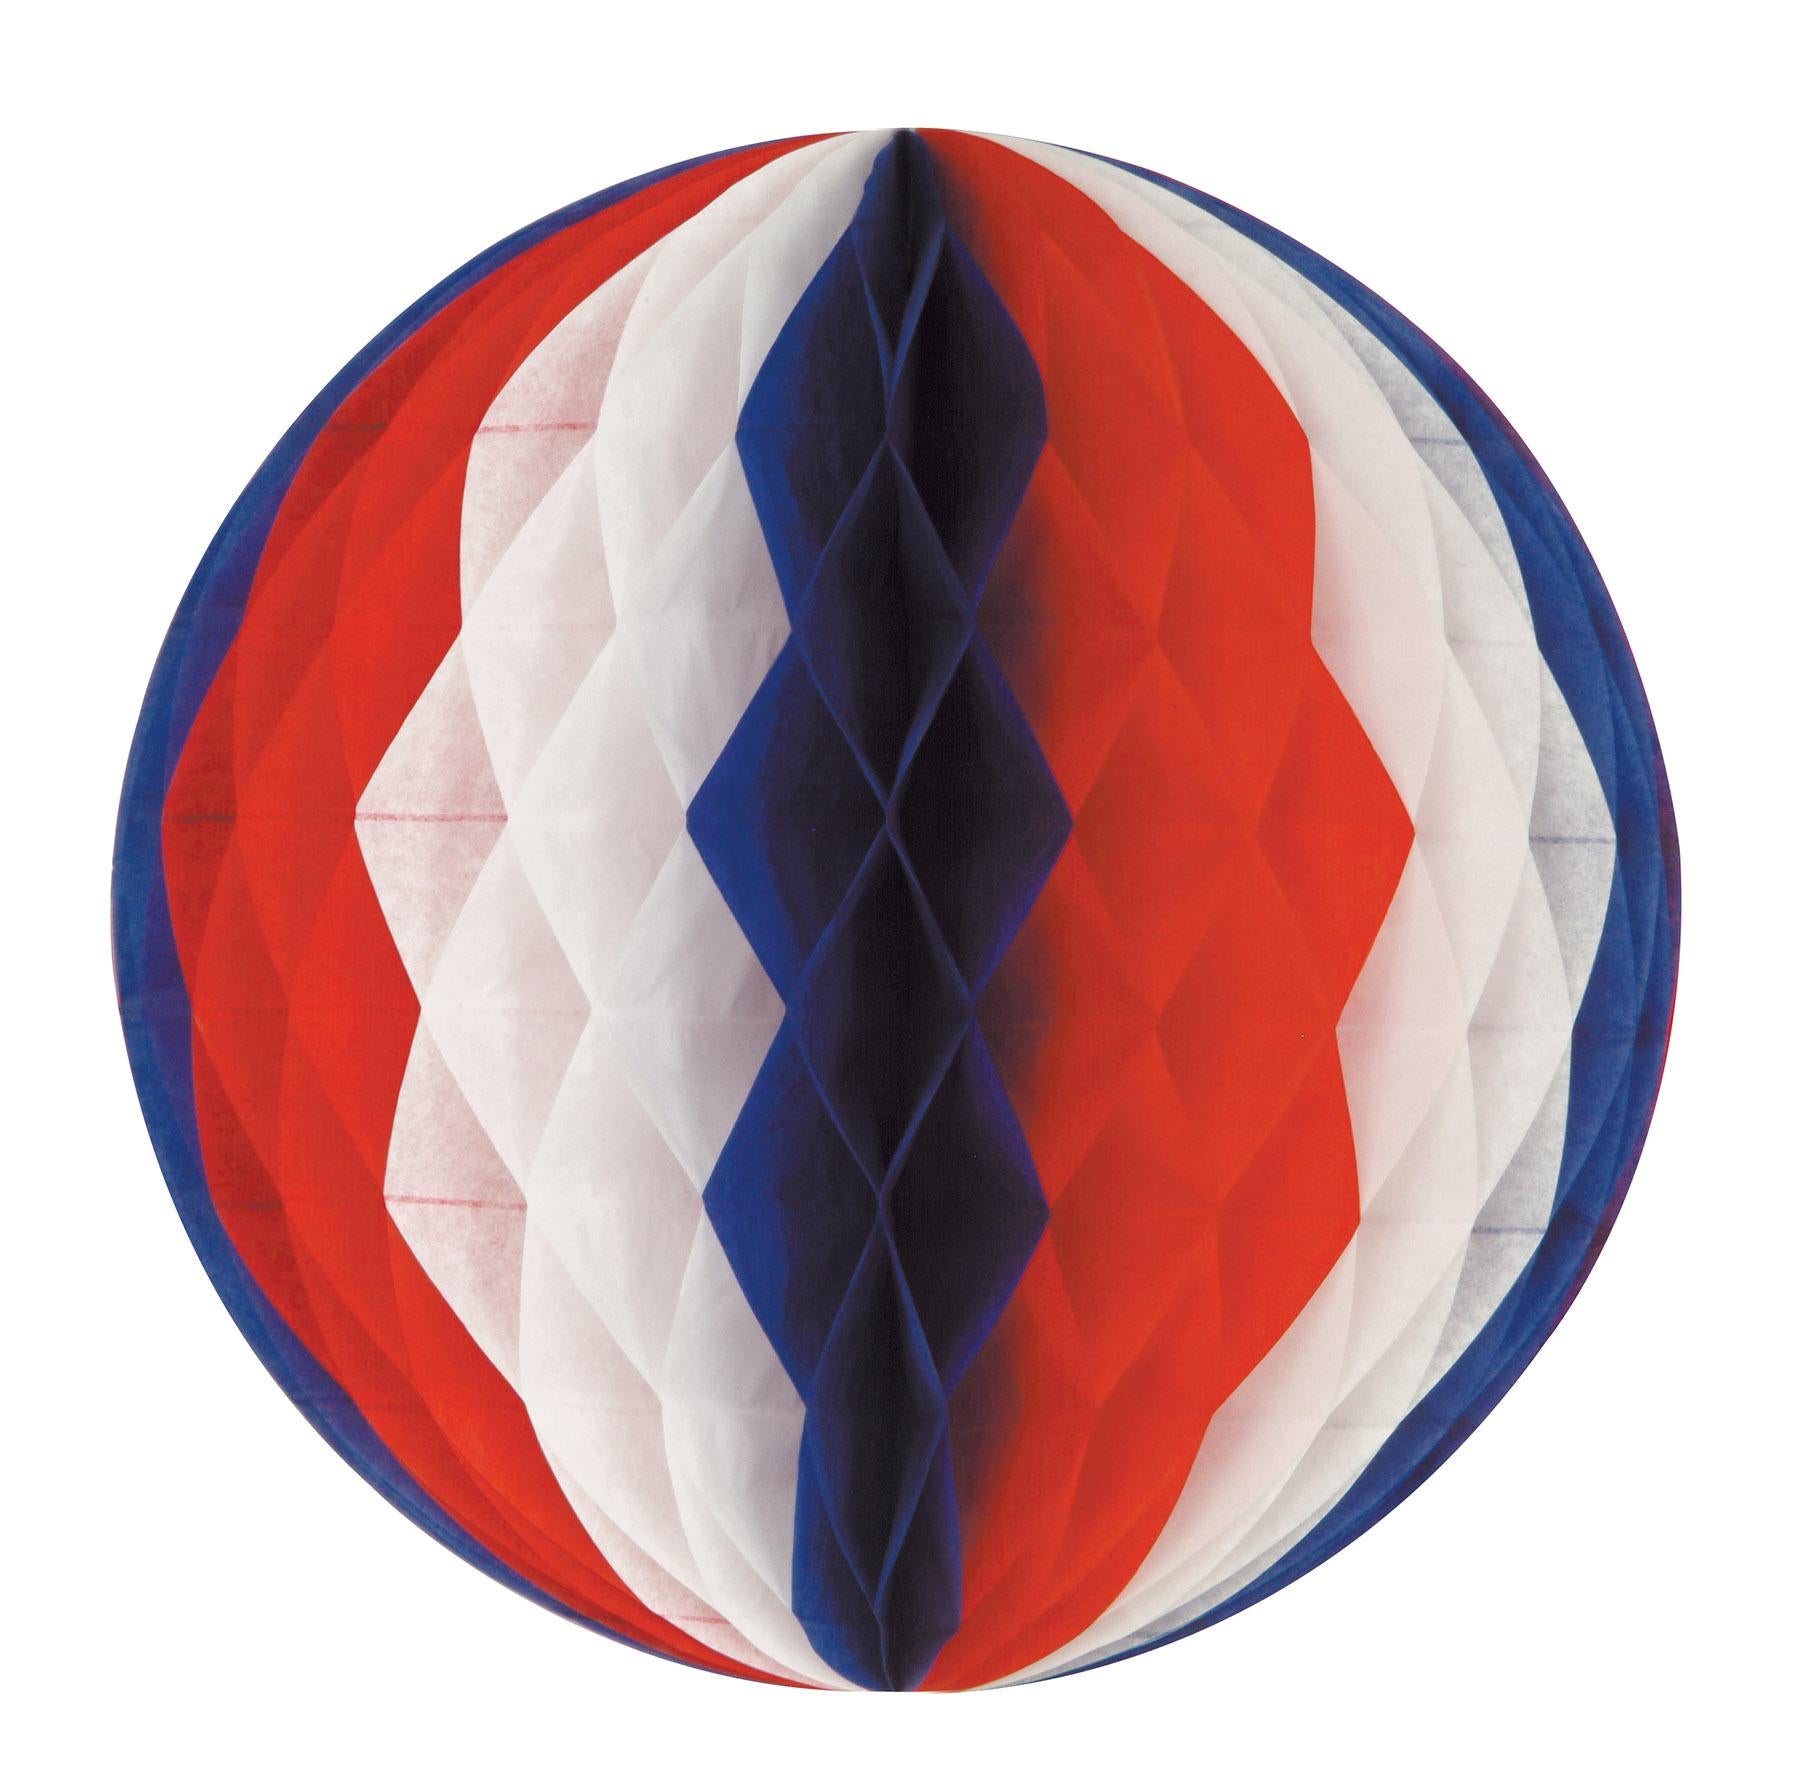 12 Inch- Beistle Tissue Party Ball - red - white - blue